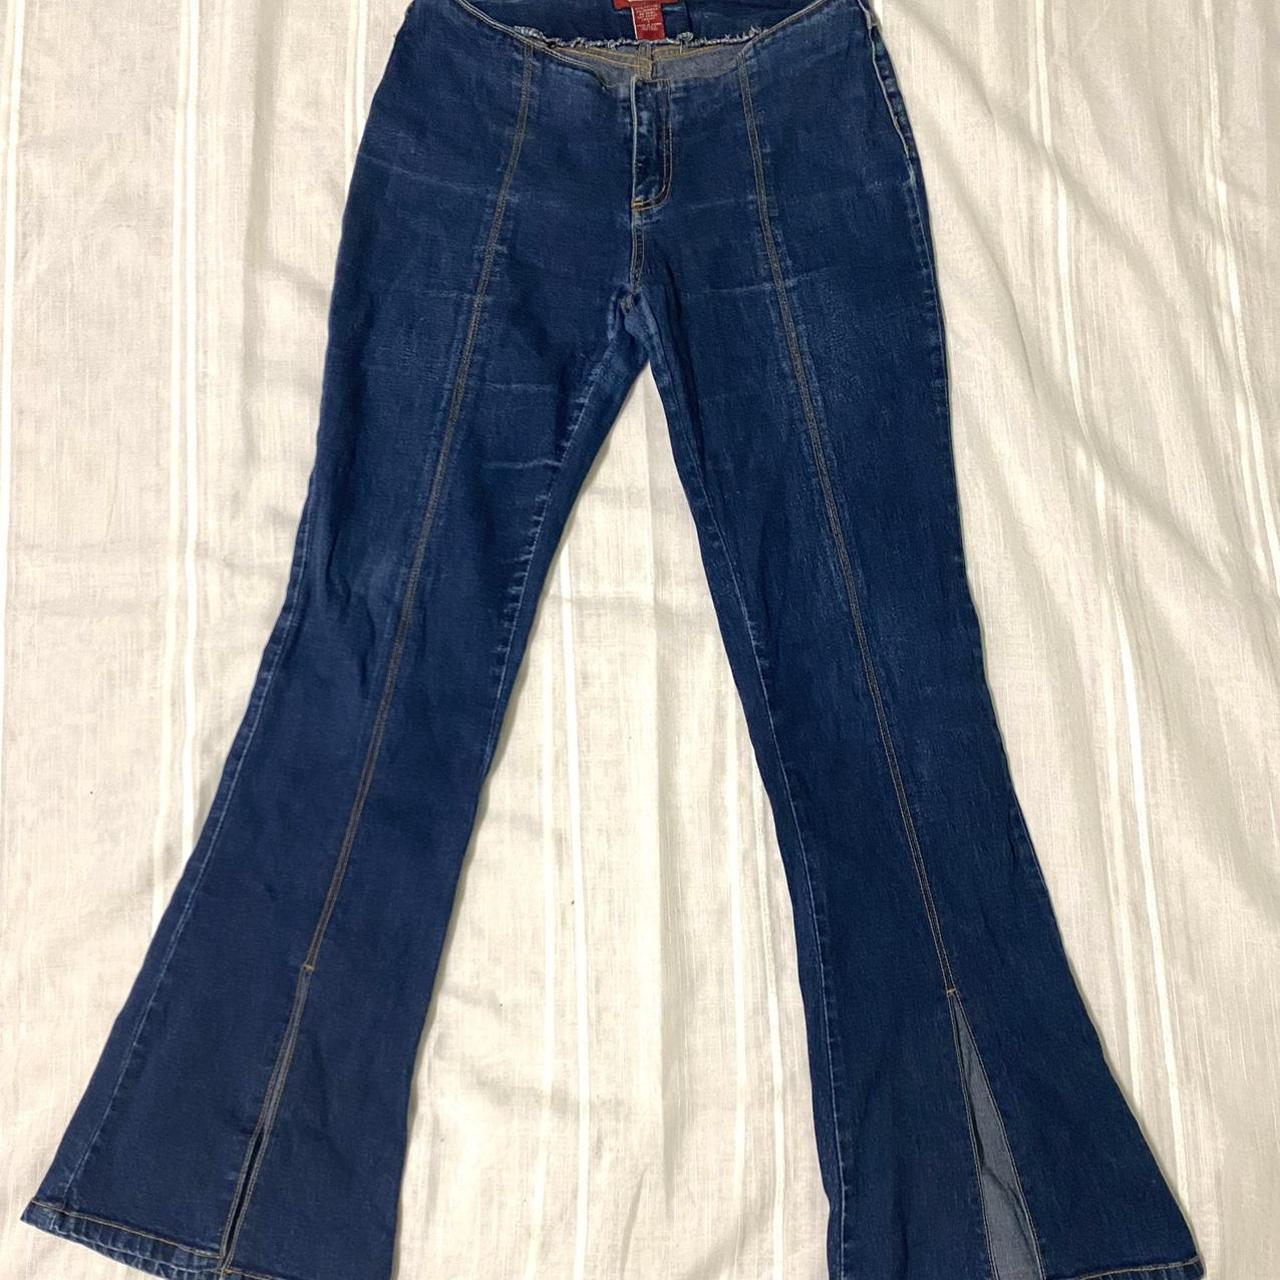 BeBop Women's Navy and Blue Jeans